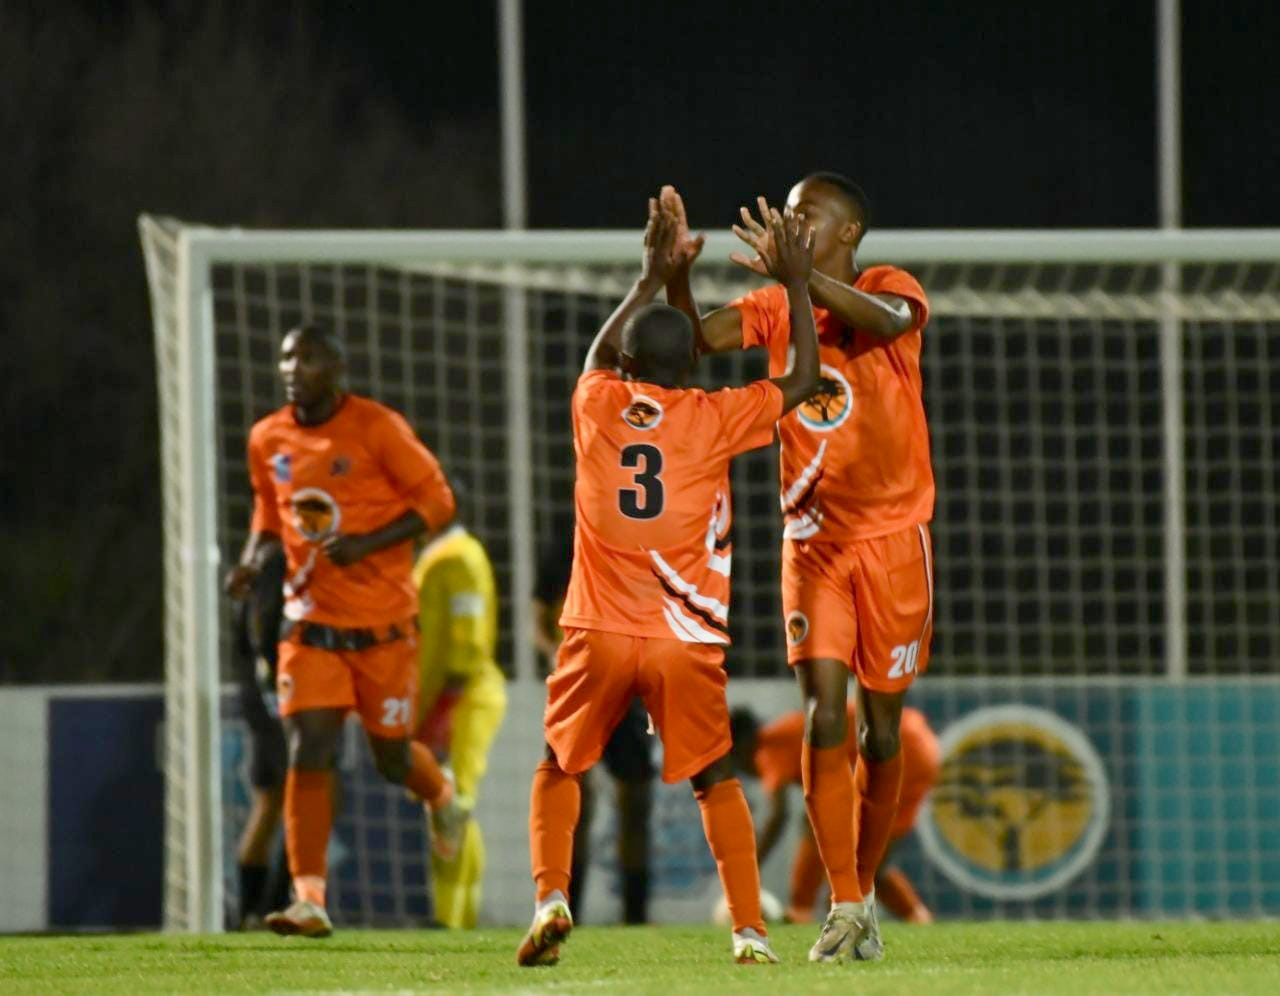 UJ players celebrate the opening goal that equalised for the Orange Army against UKZN on Thursday, 08 September 2022.